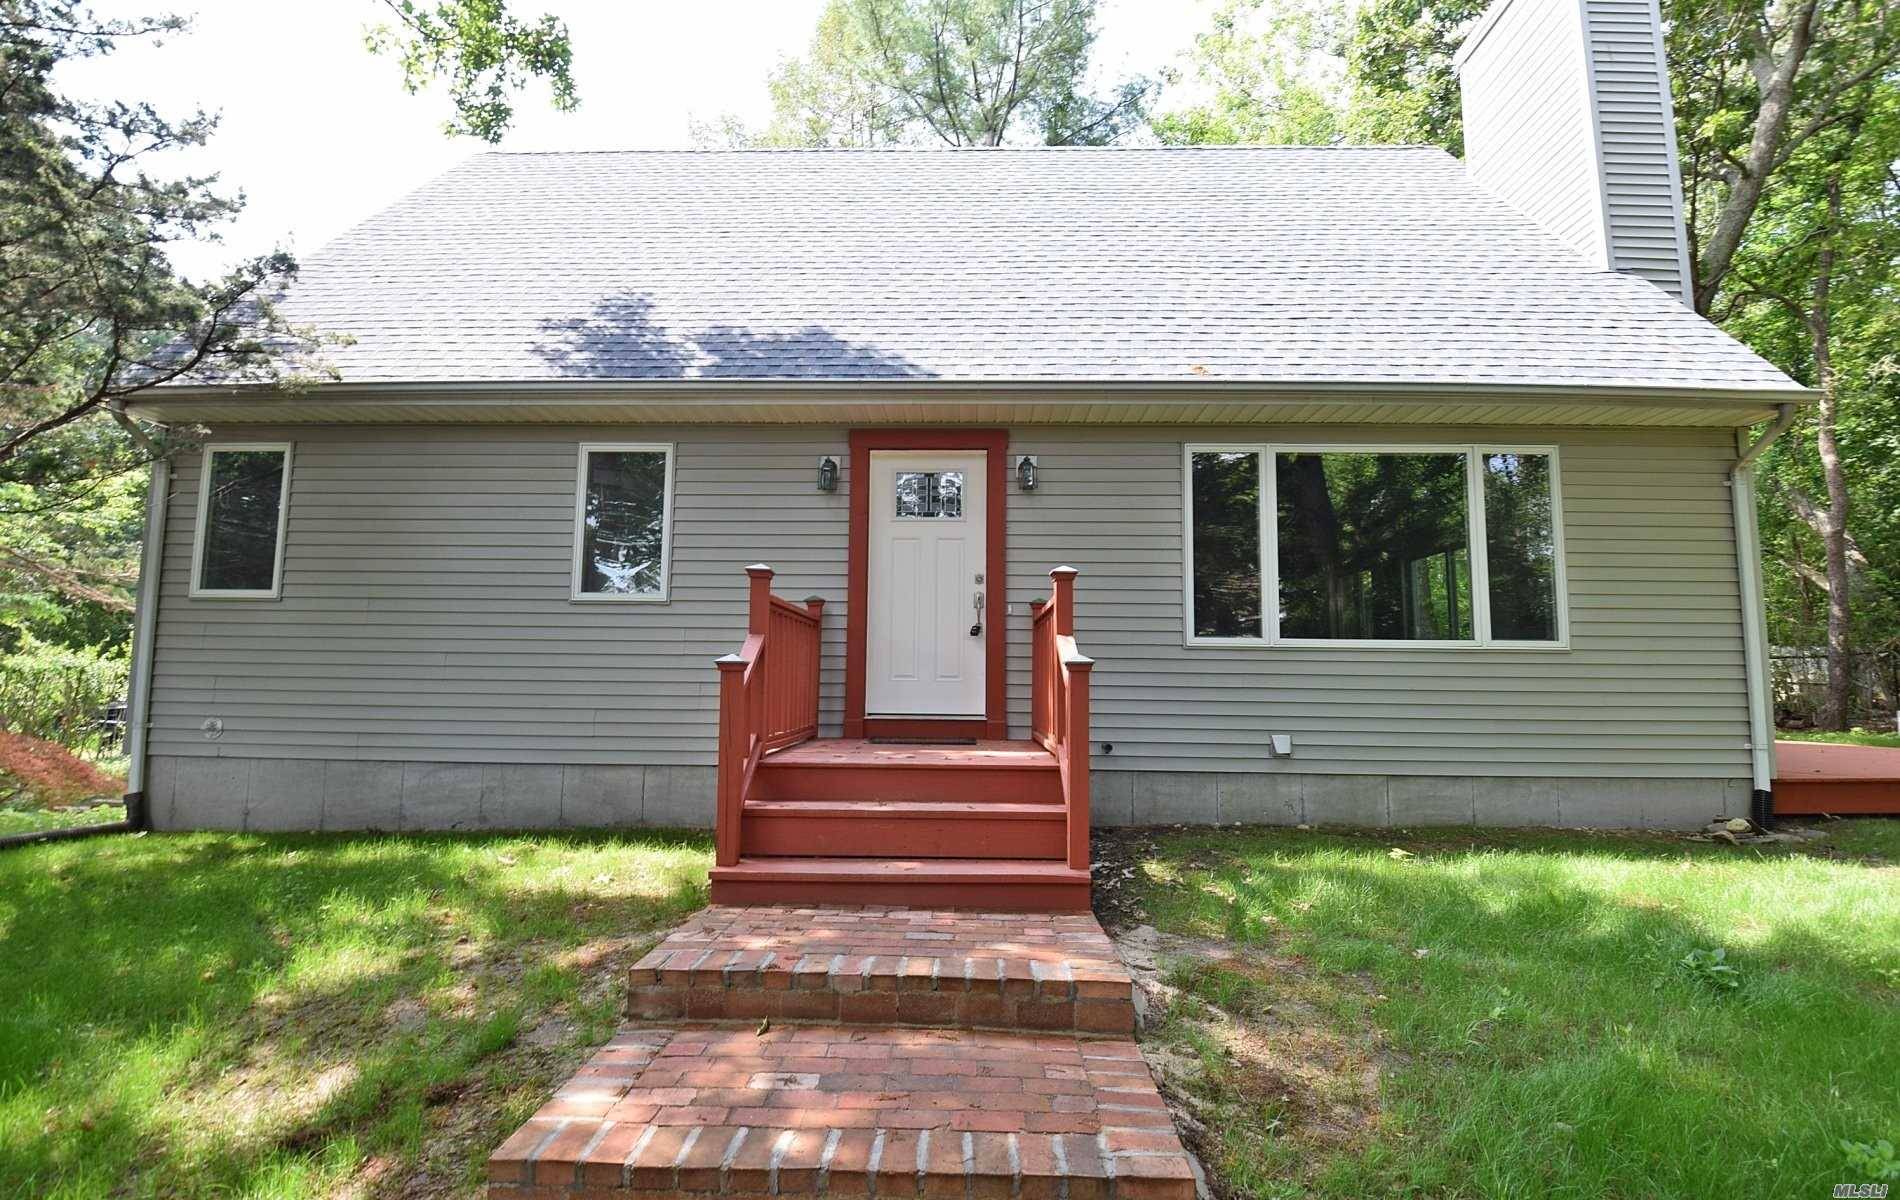 Completely Renovated ! Picture Perfect 3 Bedroom 2 New Full Bath Cape Featuring Hardwood Floors Through, New Kitchen with White Shaker Cabinets Quarts Counter and All New Stainless Steel Appliances.